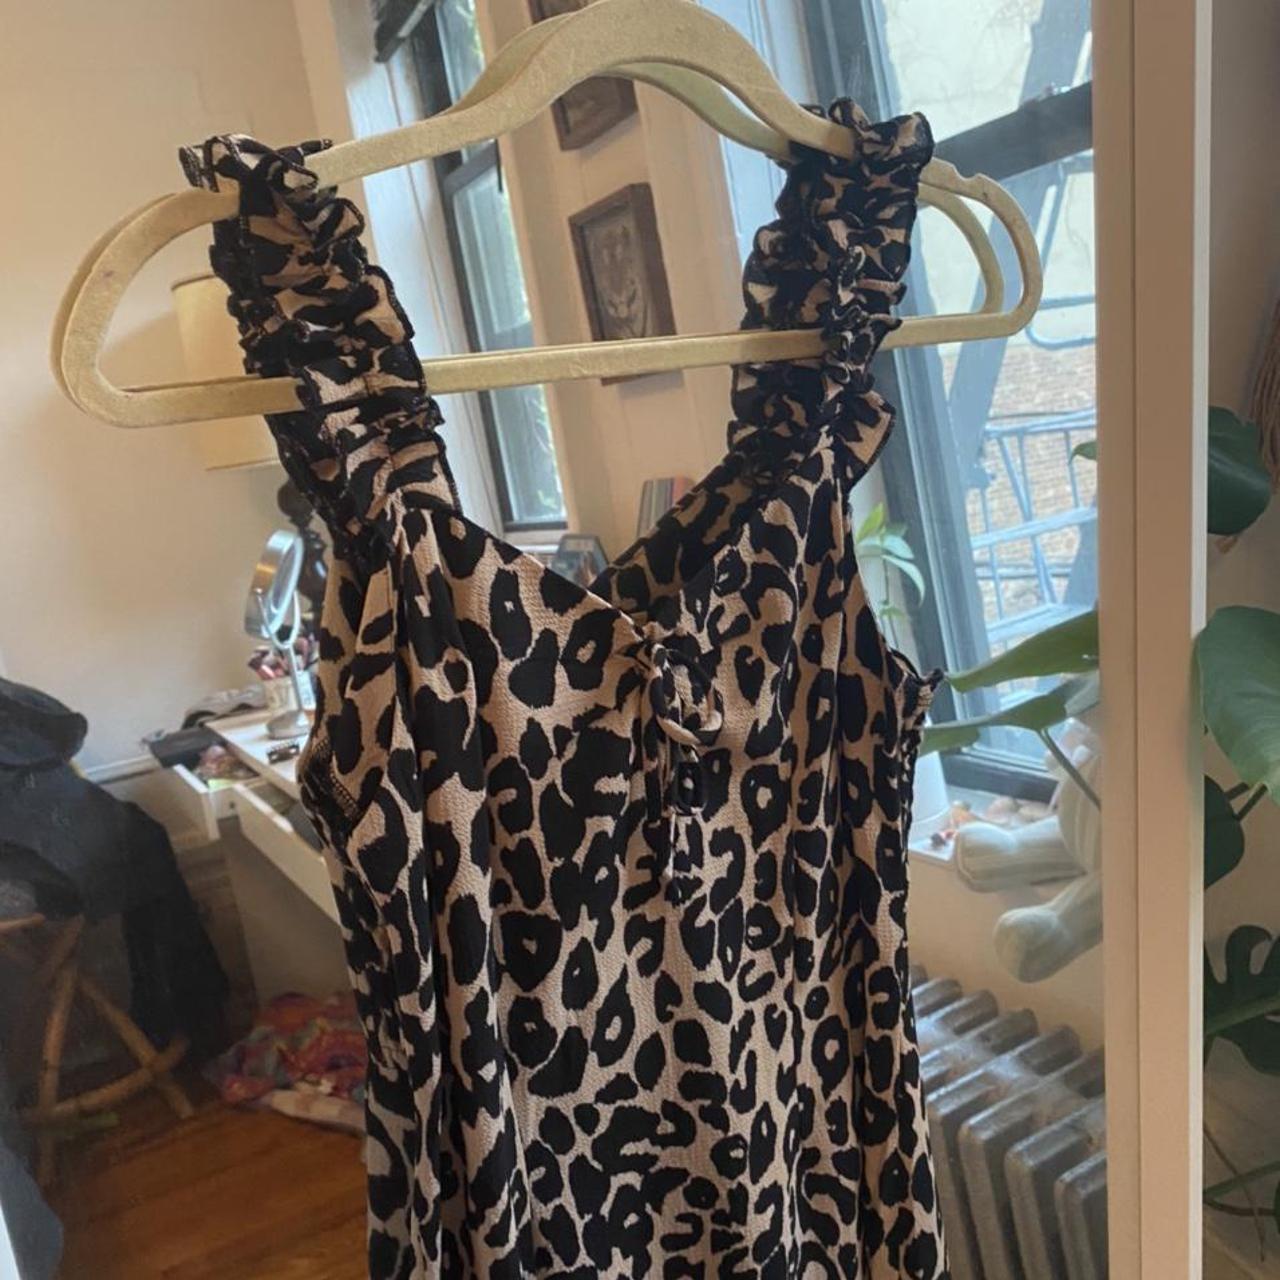 Product Image 2 - Cutest Leopard Mini Dress!
Only worn